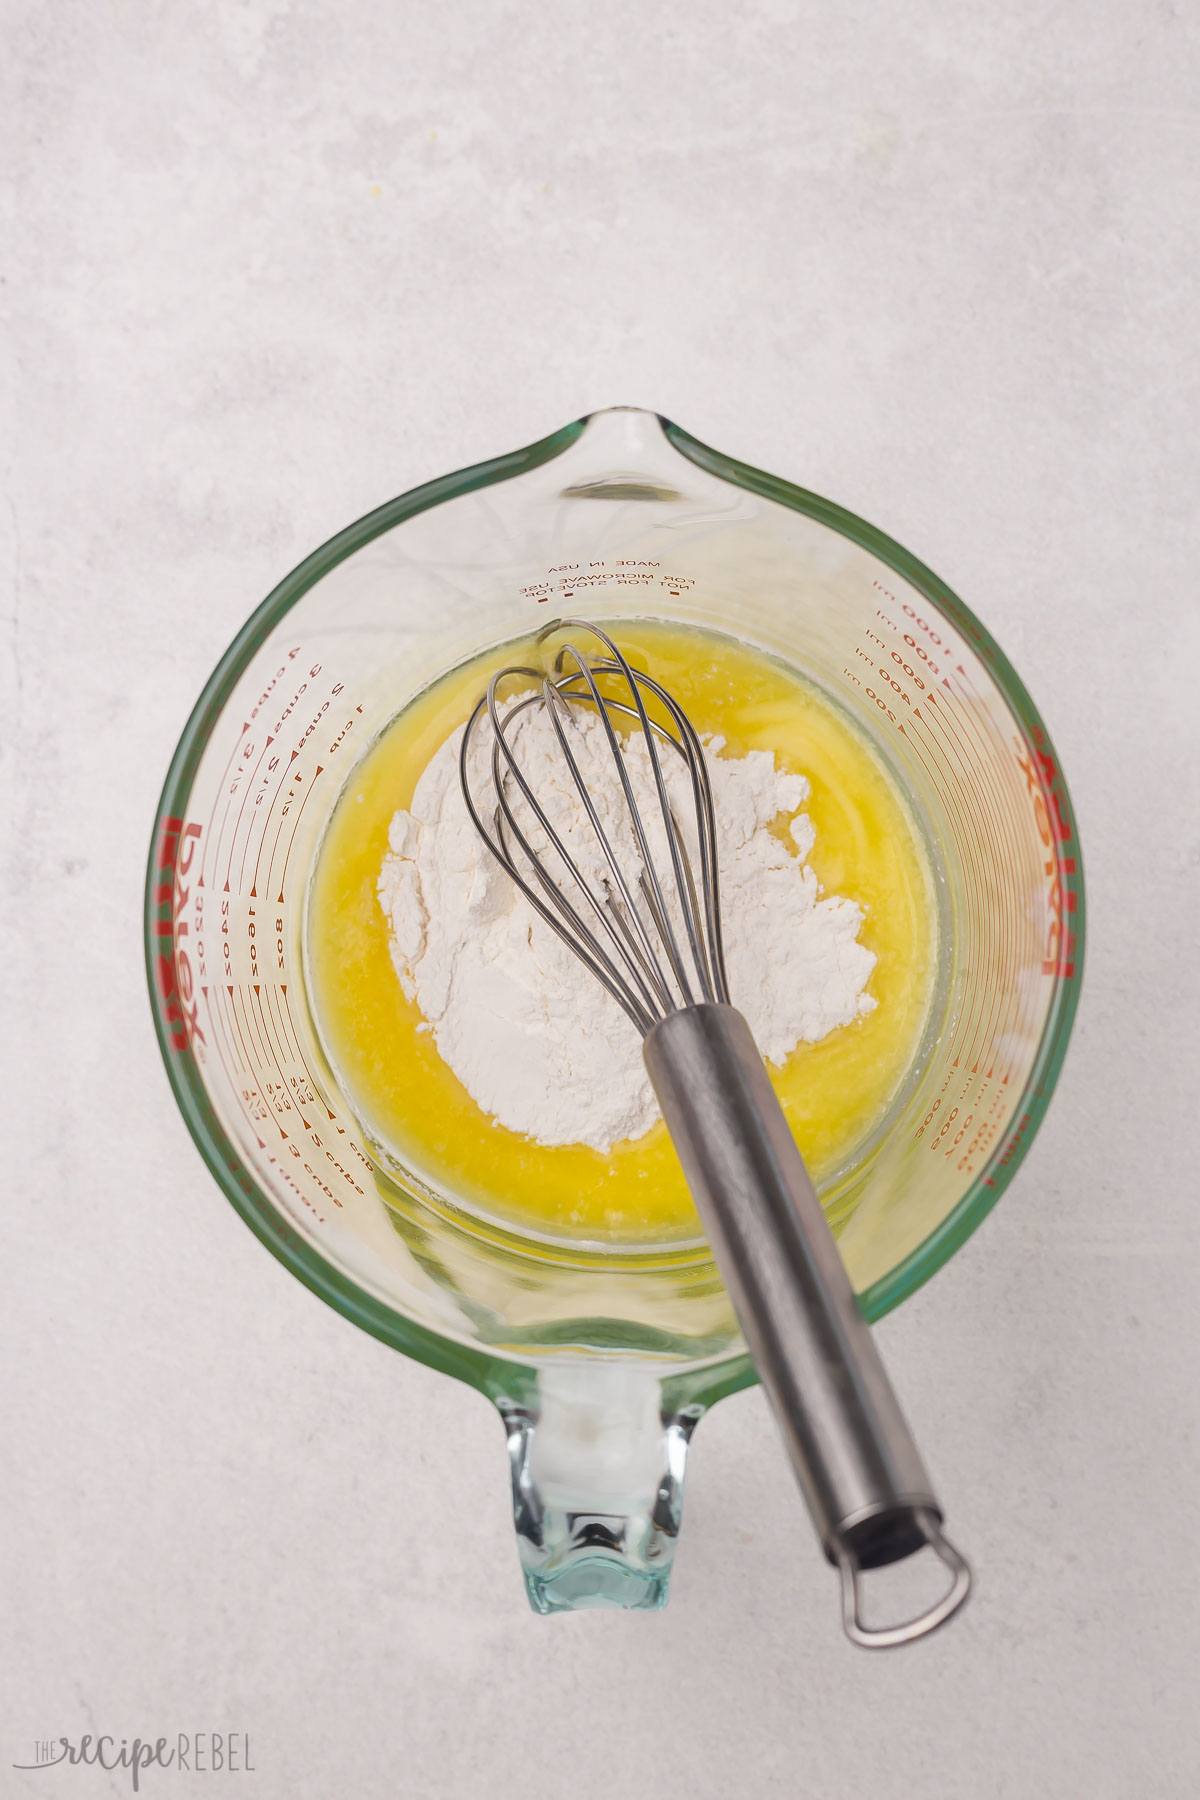 Top view of a glass jug with melted butter in the bottom and flour on top and a whisk in it.